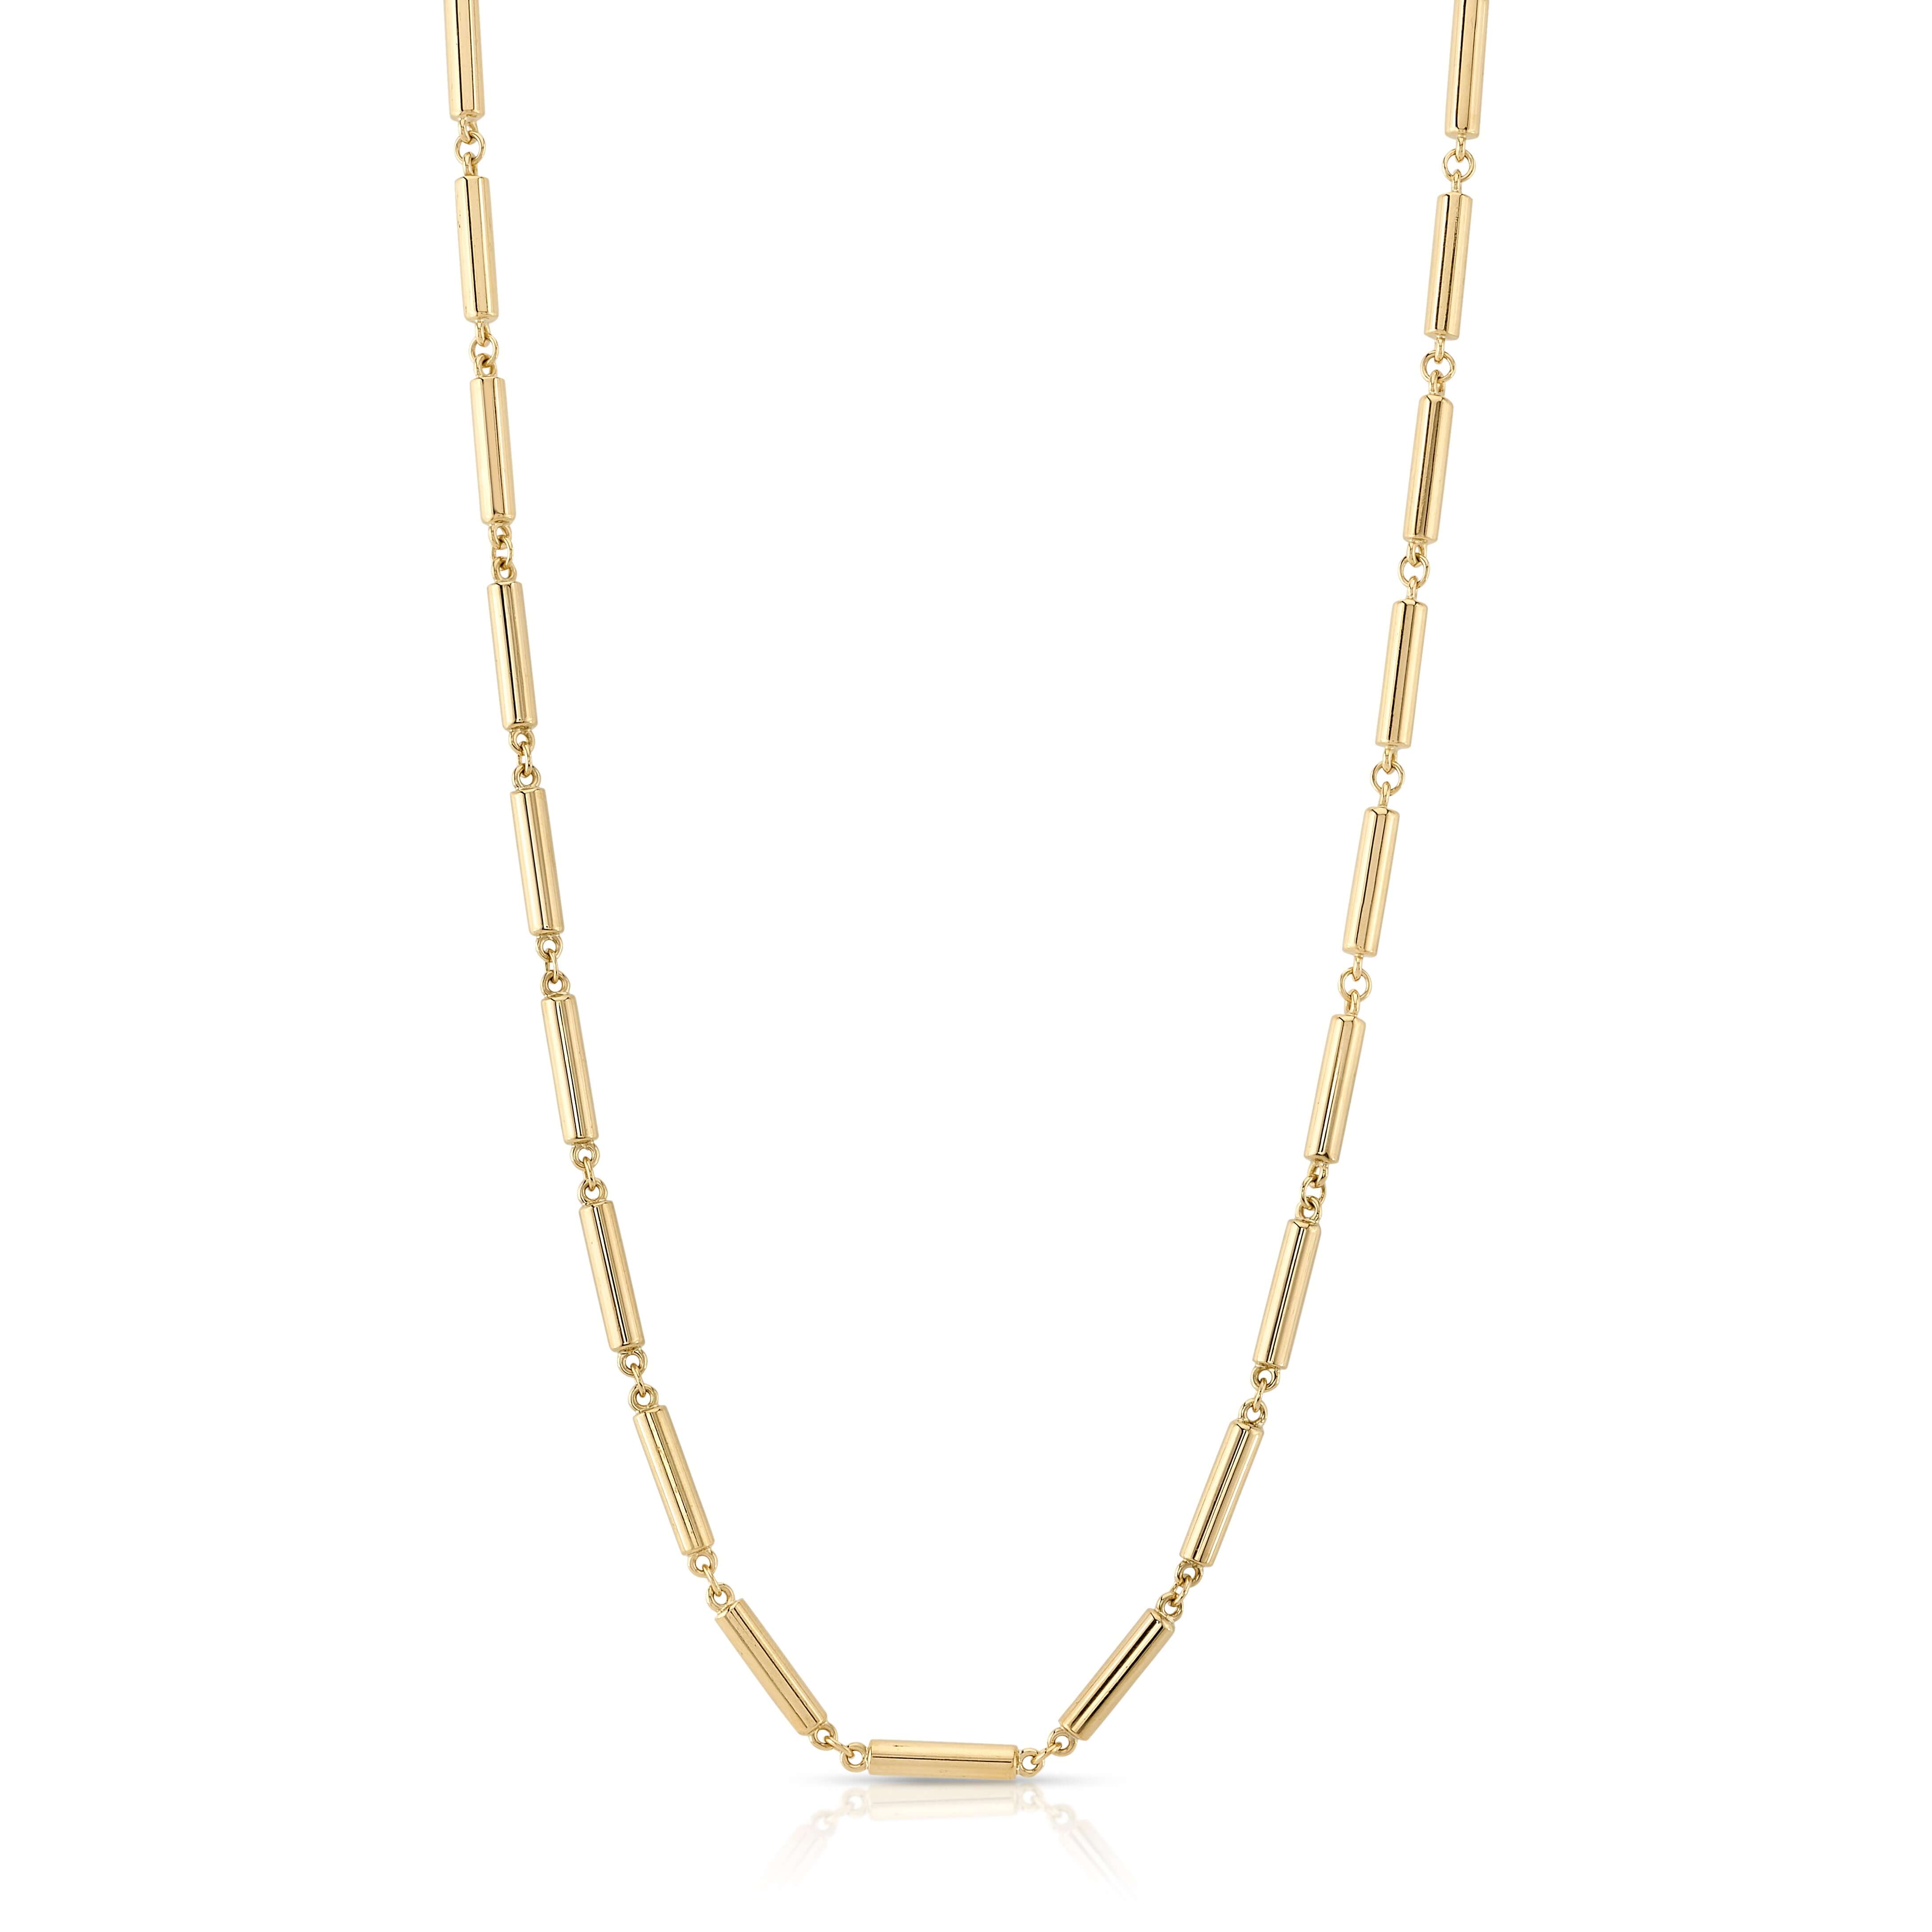 SINGLE STONE LEDA NECKLACE featuring Handcrafted 18K yellow gold cylindrical link necklace. Available in 17" and 22.5" lengths.